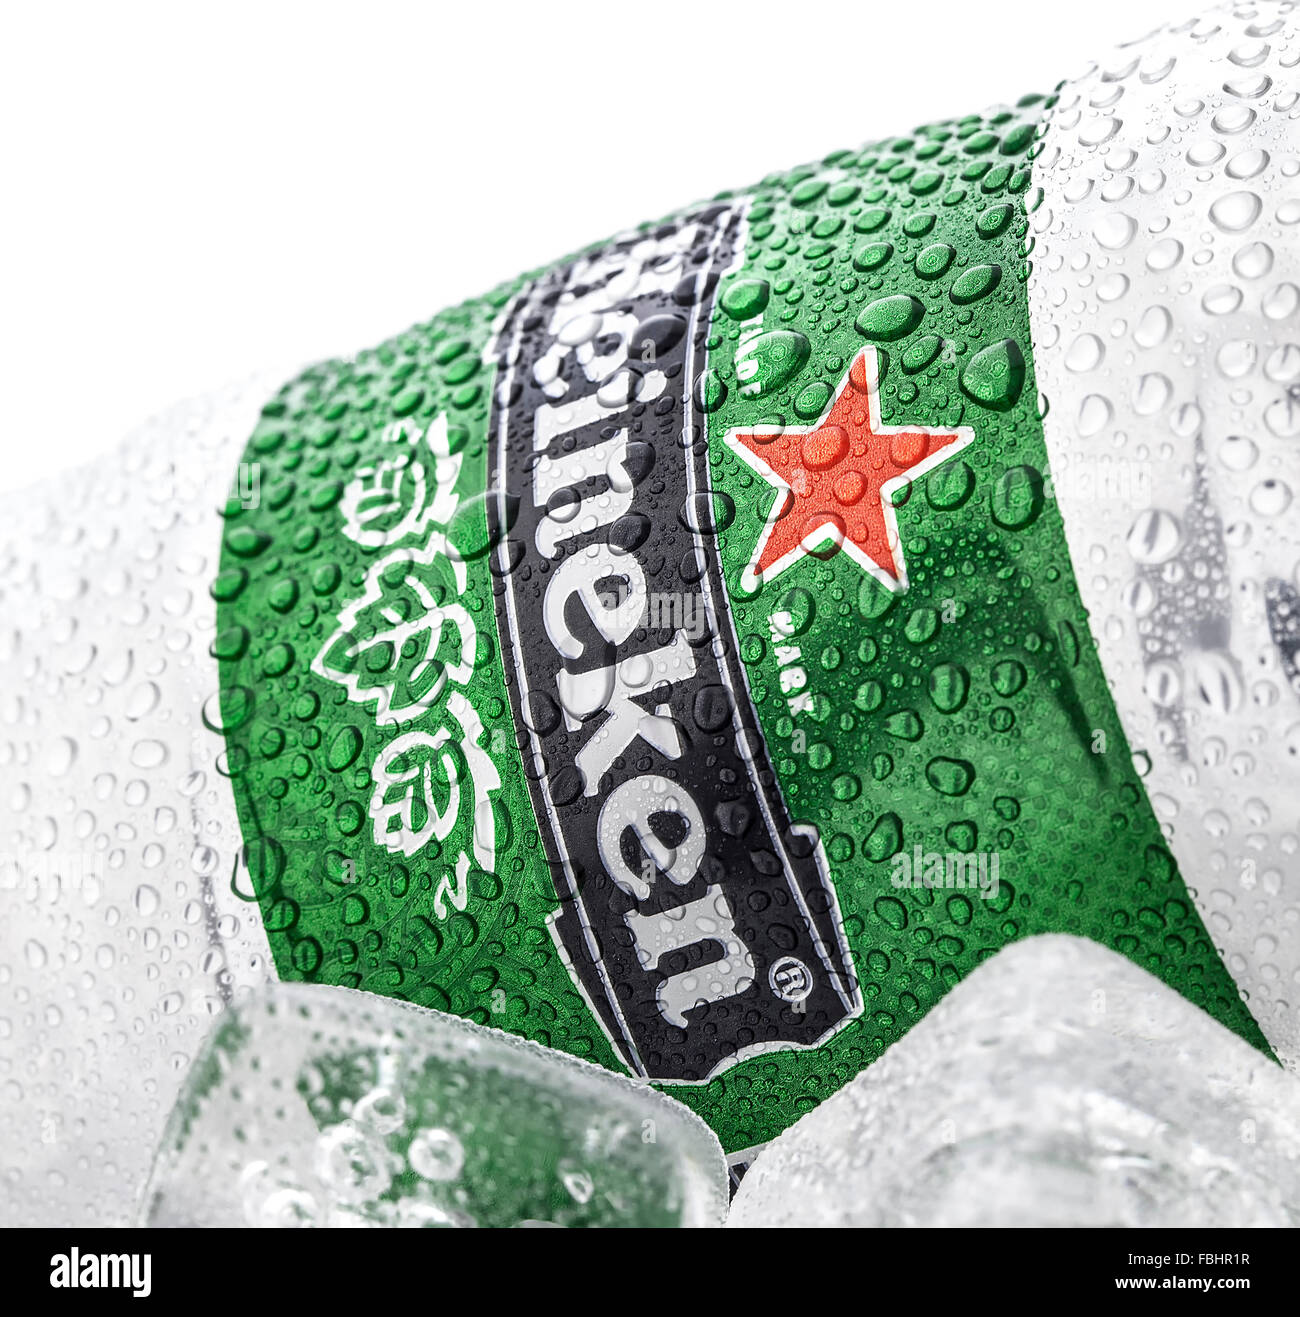 Cold can of Heineken Beer on ice over a white background Stock Photo